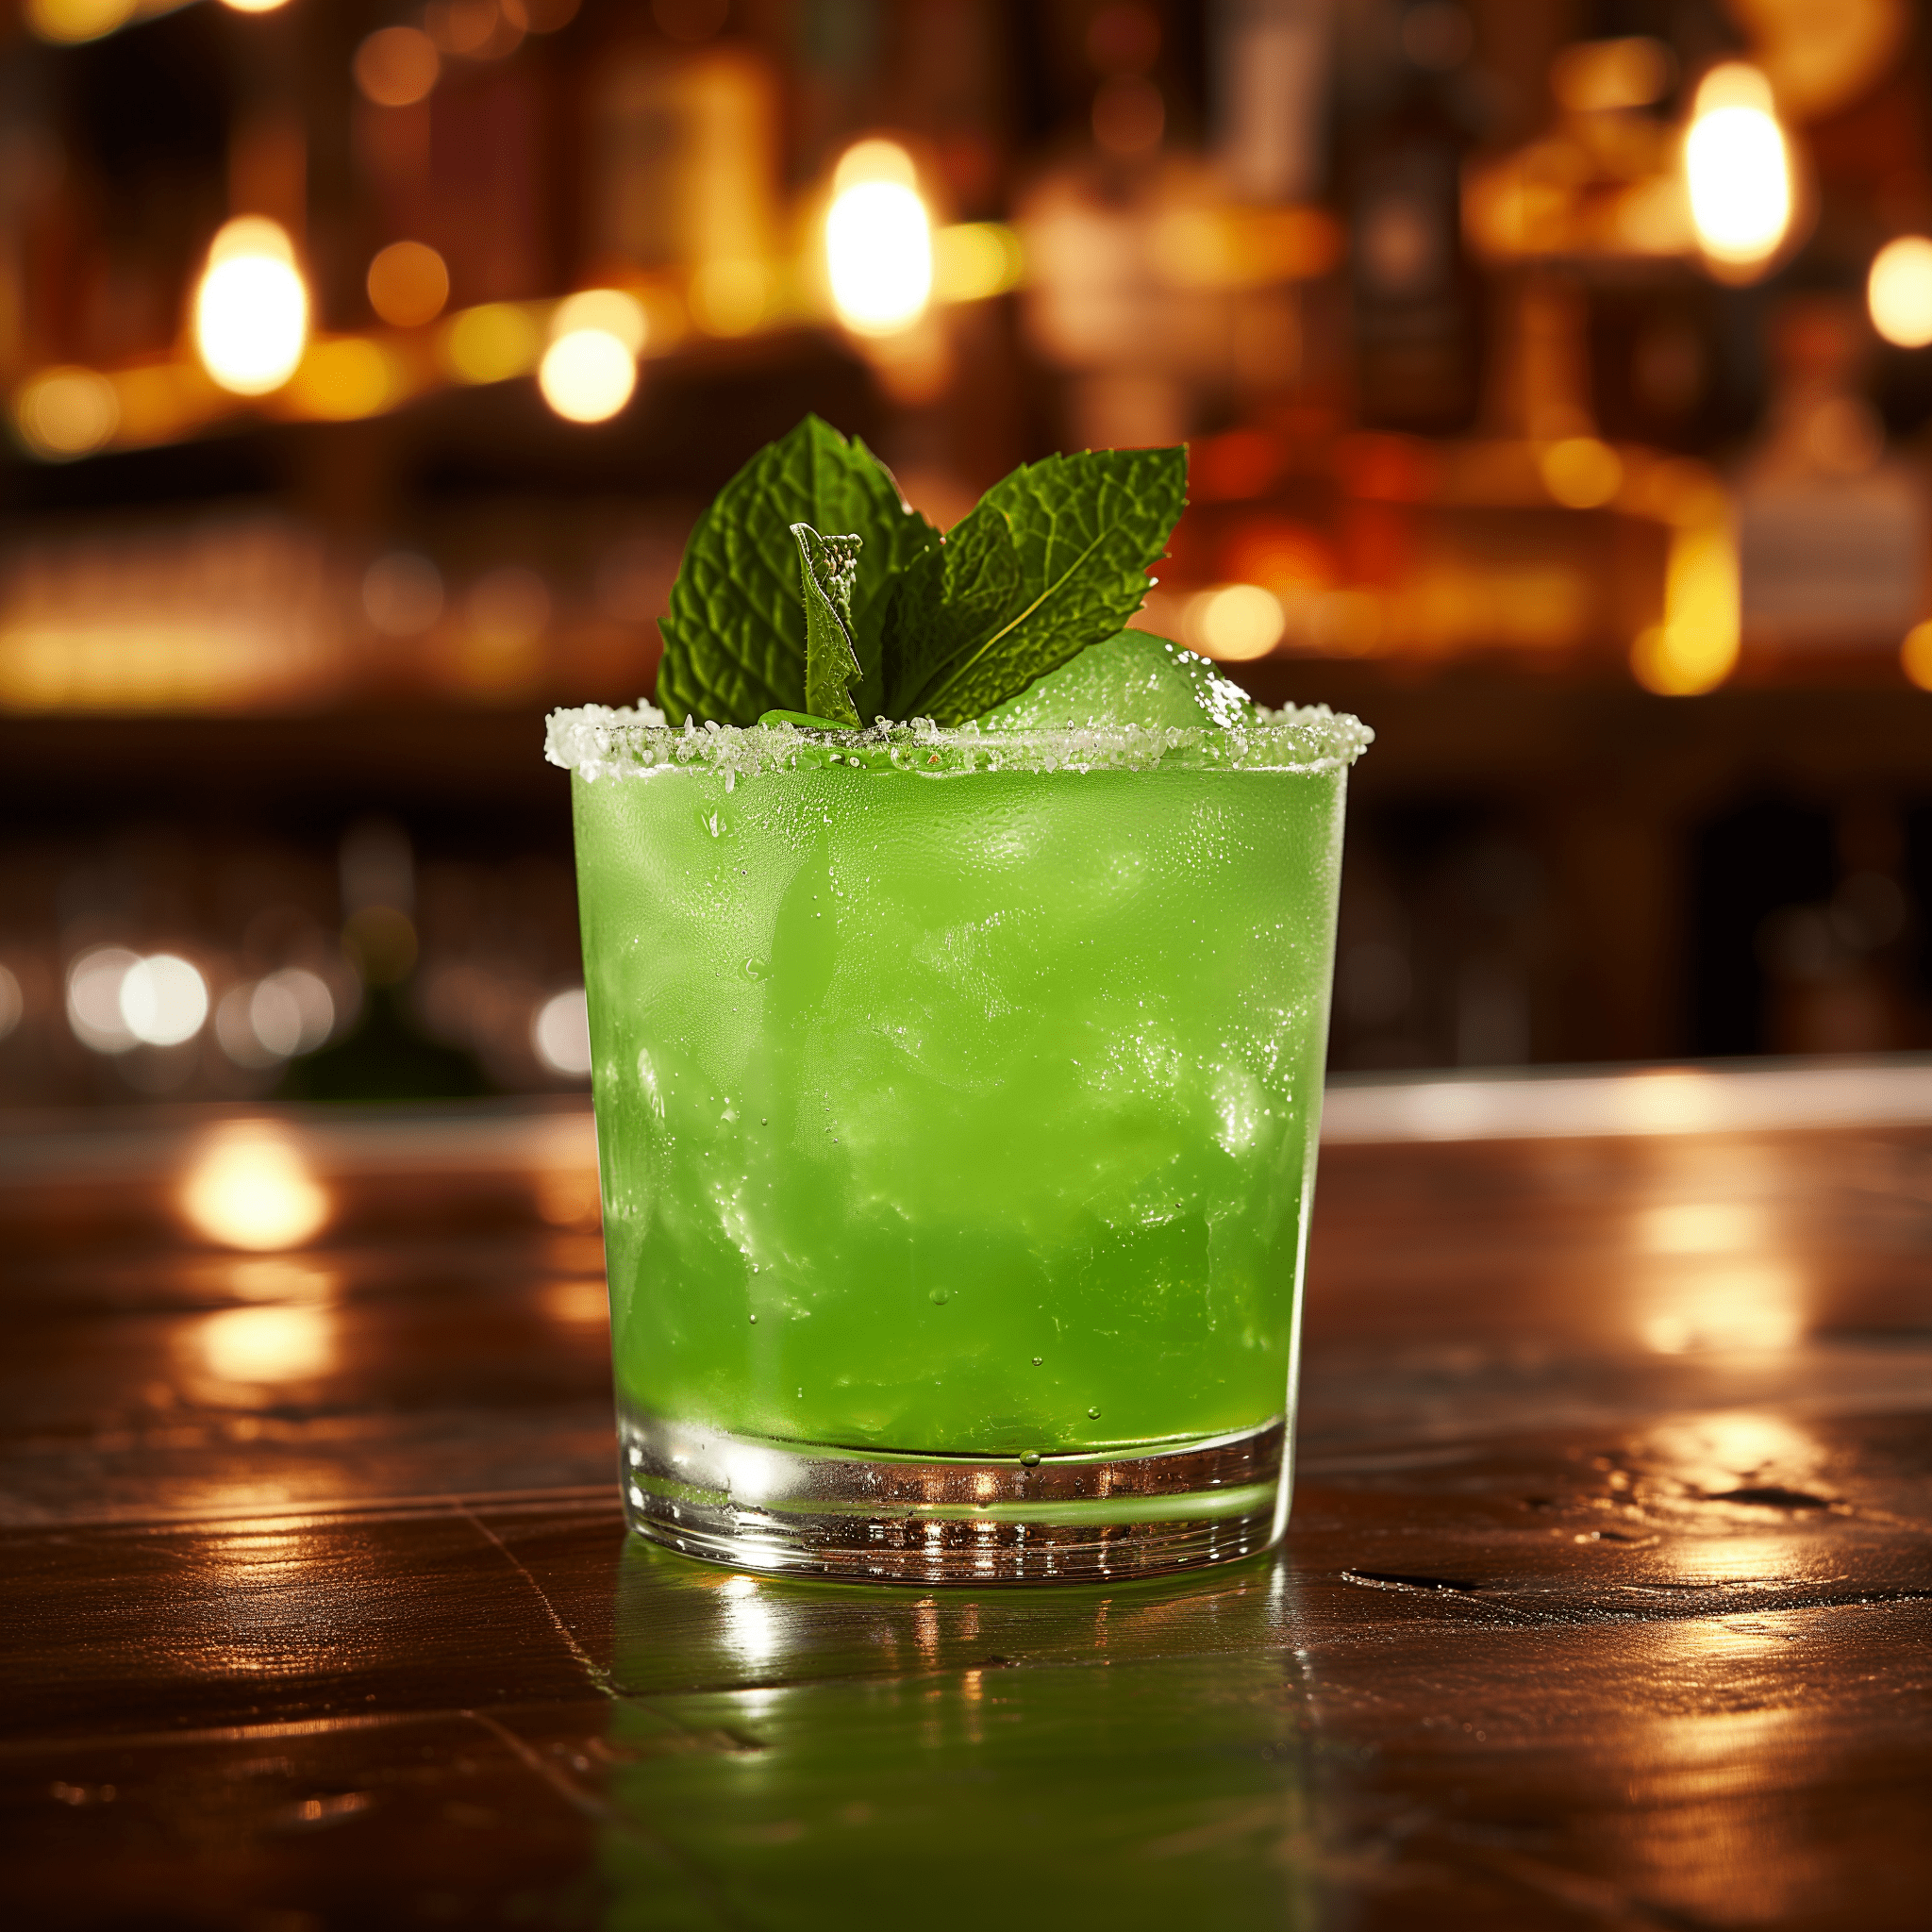 Mystic Mint Elixir Recipe - The Mystic Mint Elixir offers a symphony of flavors. It's herbaceous and complex, with a pronounced minty freshness. The Green Chartreuse provides a sweet yet spicy undertone, while the lime juice adds a citrusy zing, creating a balanced and invigorating shot.